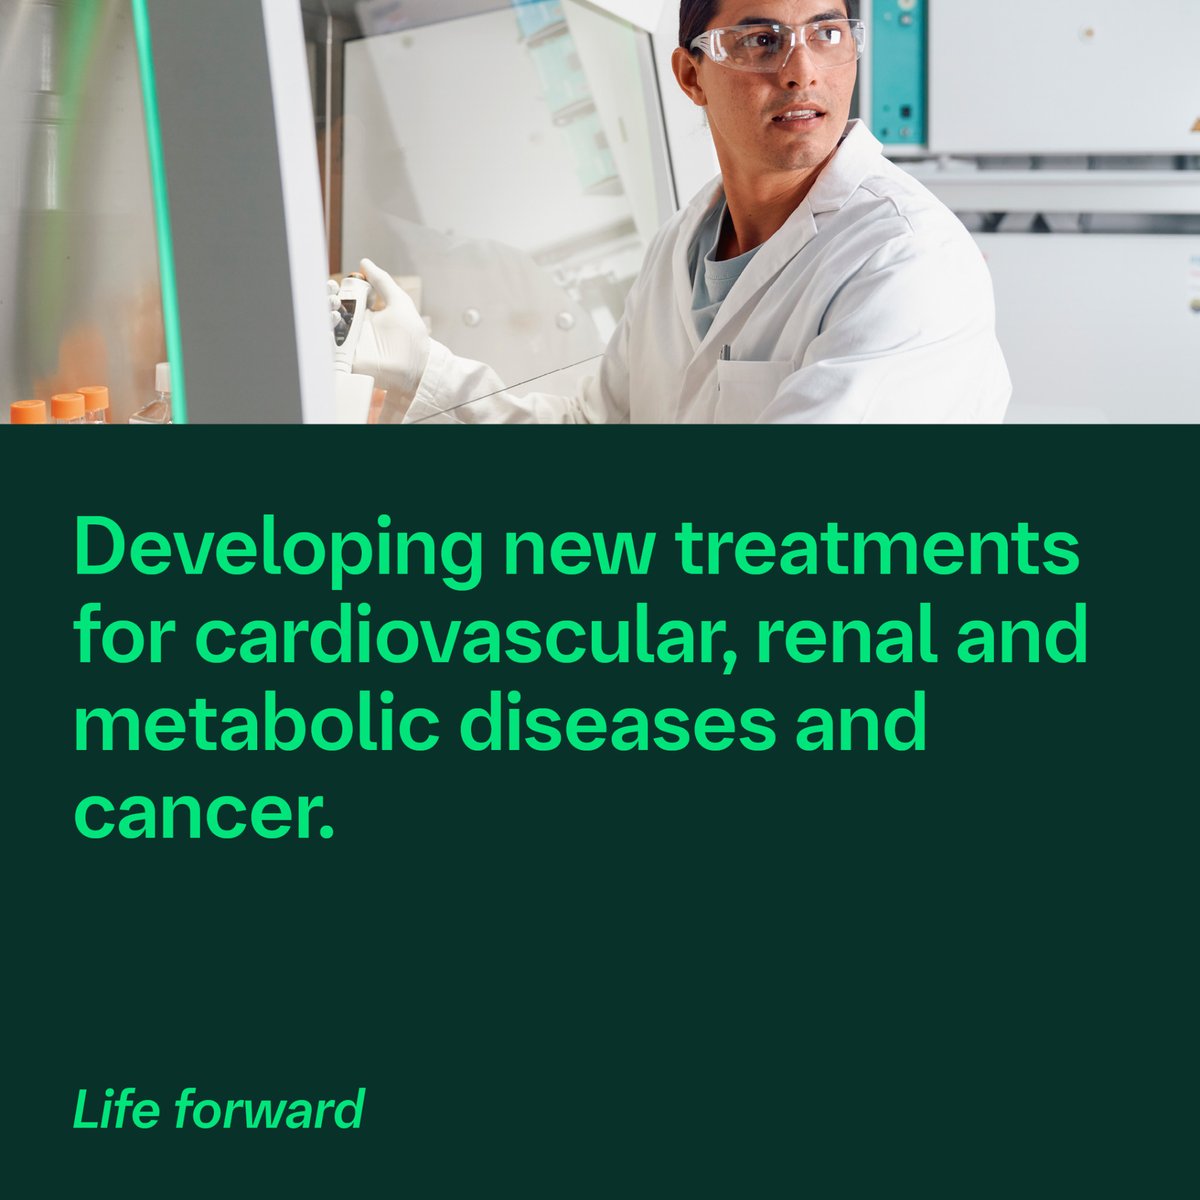 #NEWS: We are excited to expand our partnership with @OSEImmuno to develop novel first-in-class treatments for cancer and cardio-renal-metabolic (CRM) diseases.

Learn more: bit.ly/3V9fWmn

#CardioMetabolic #Cancer #ResearchAndDevelopment